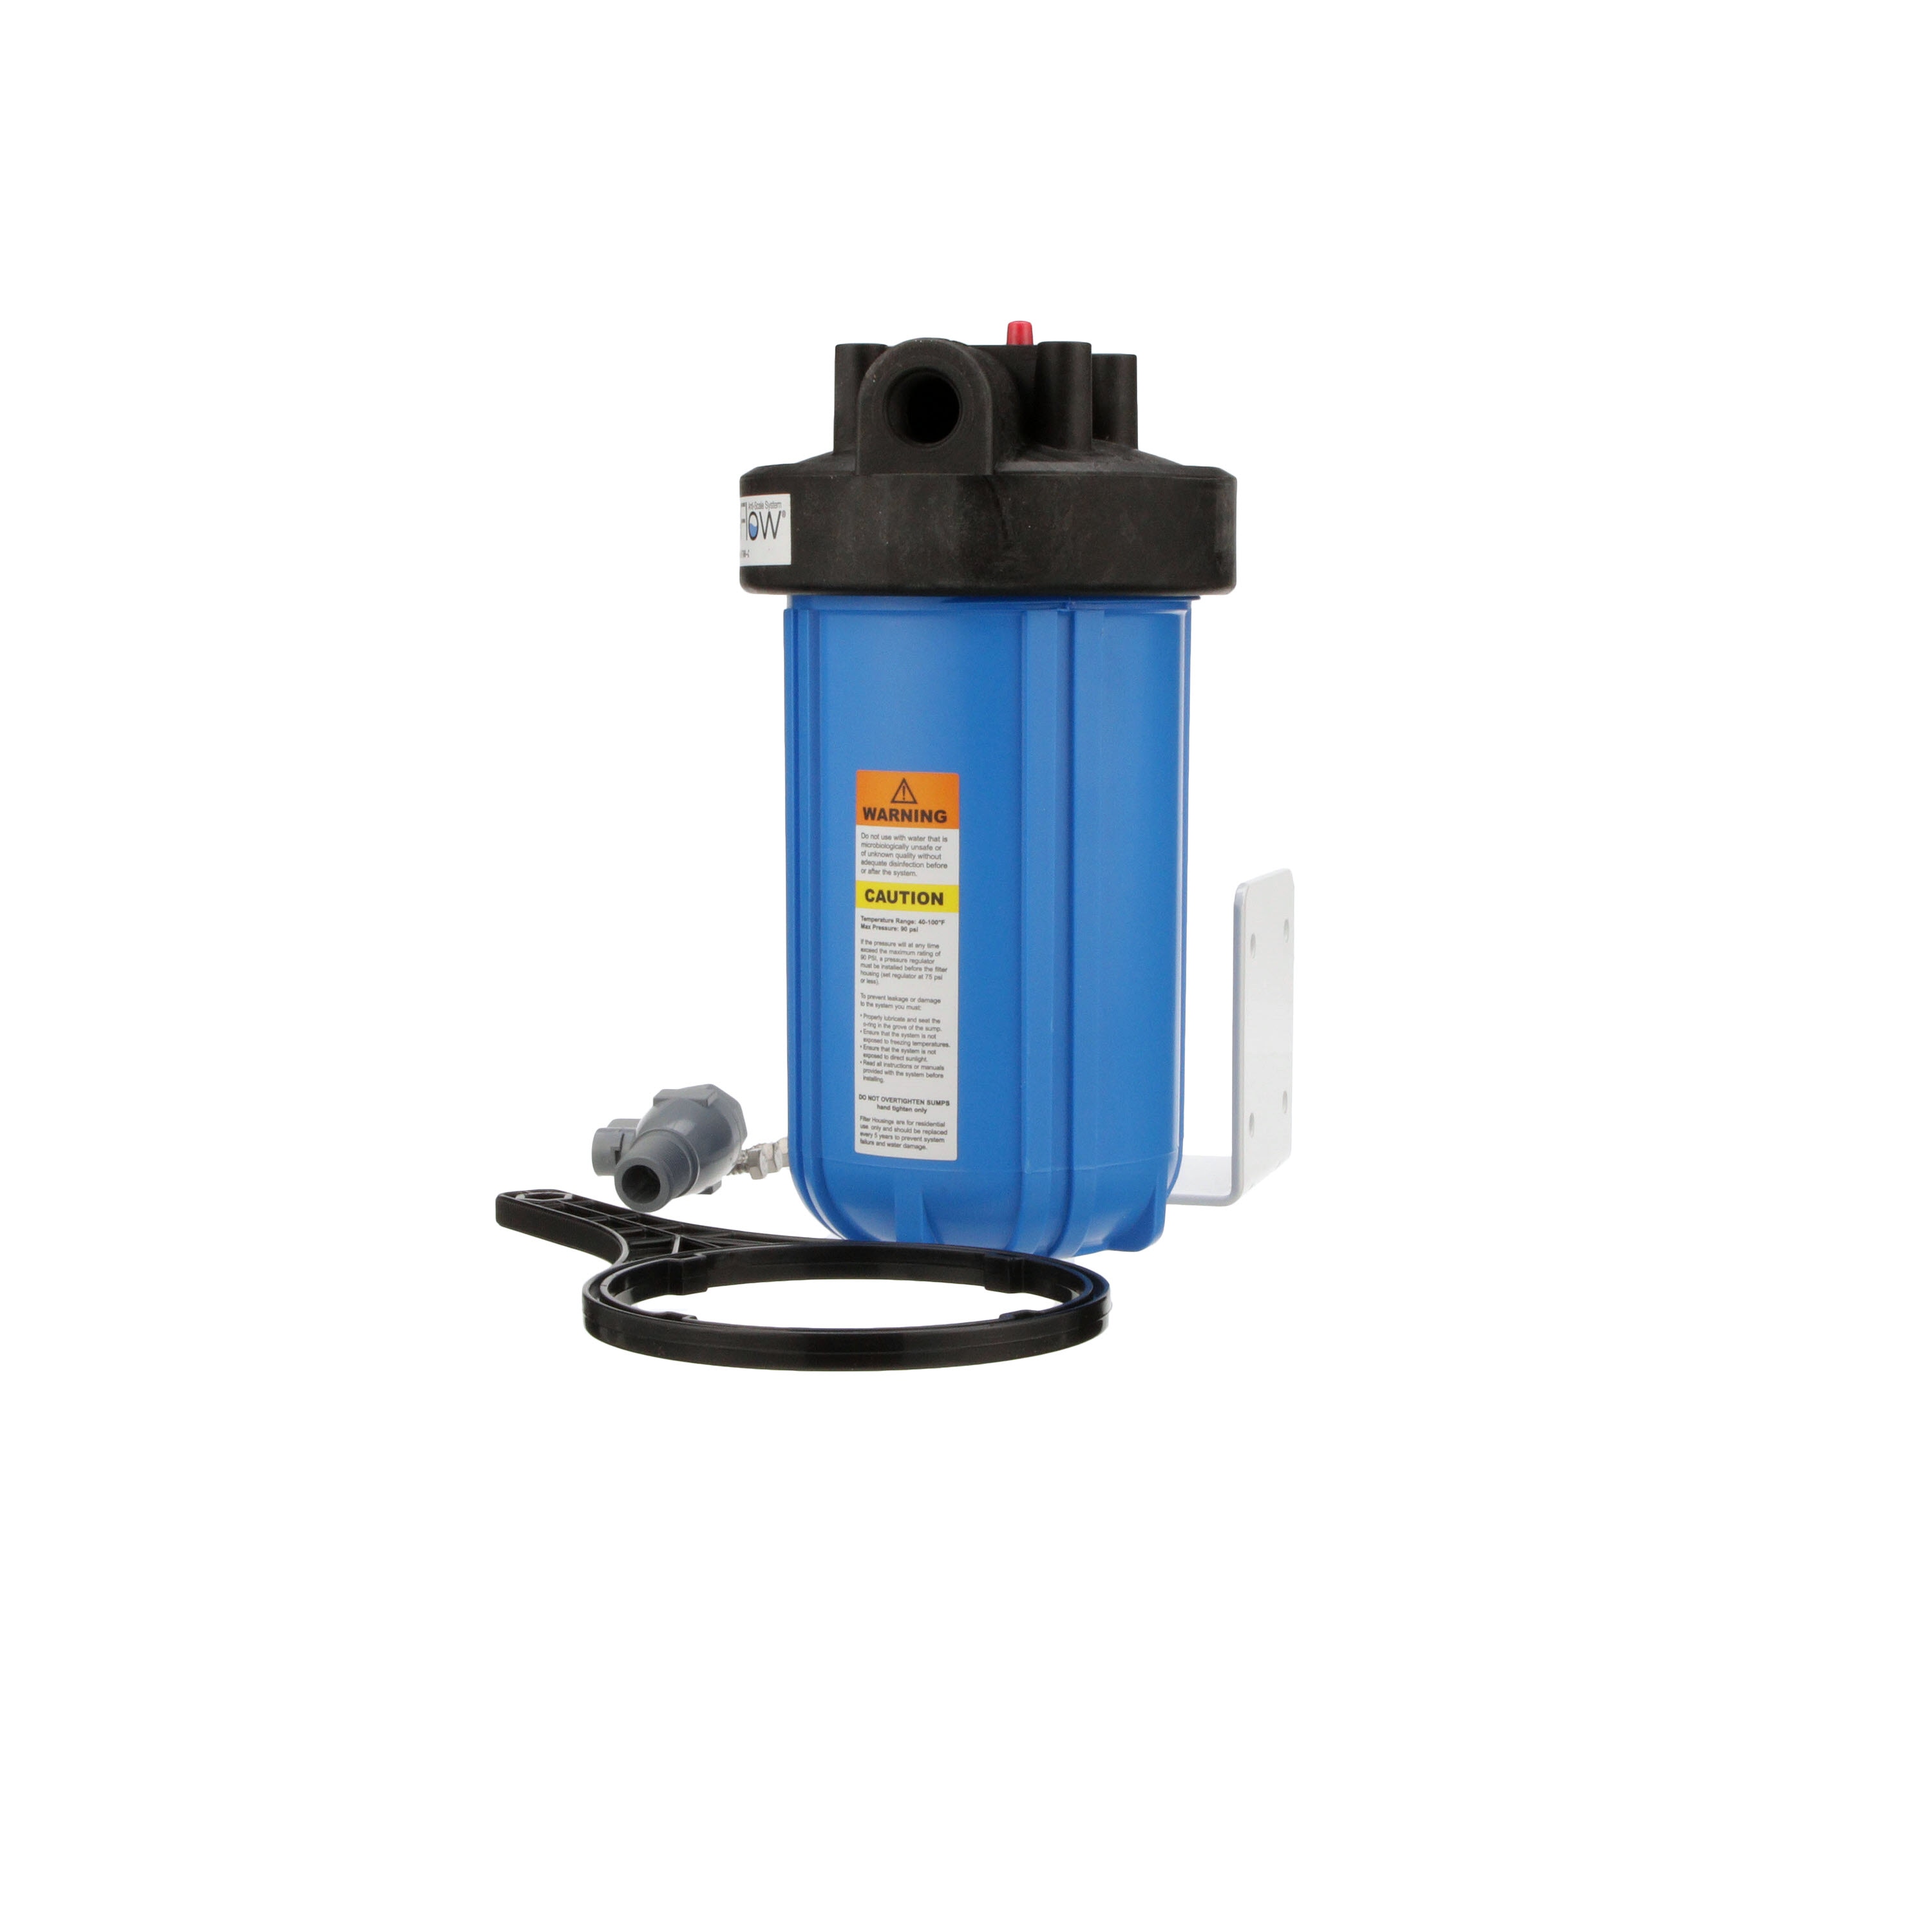 Watts OneFlow Anti-Scale Water Softener System at Lowes.com